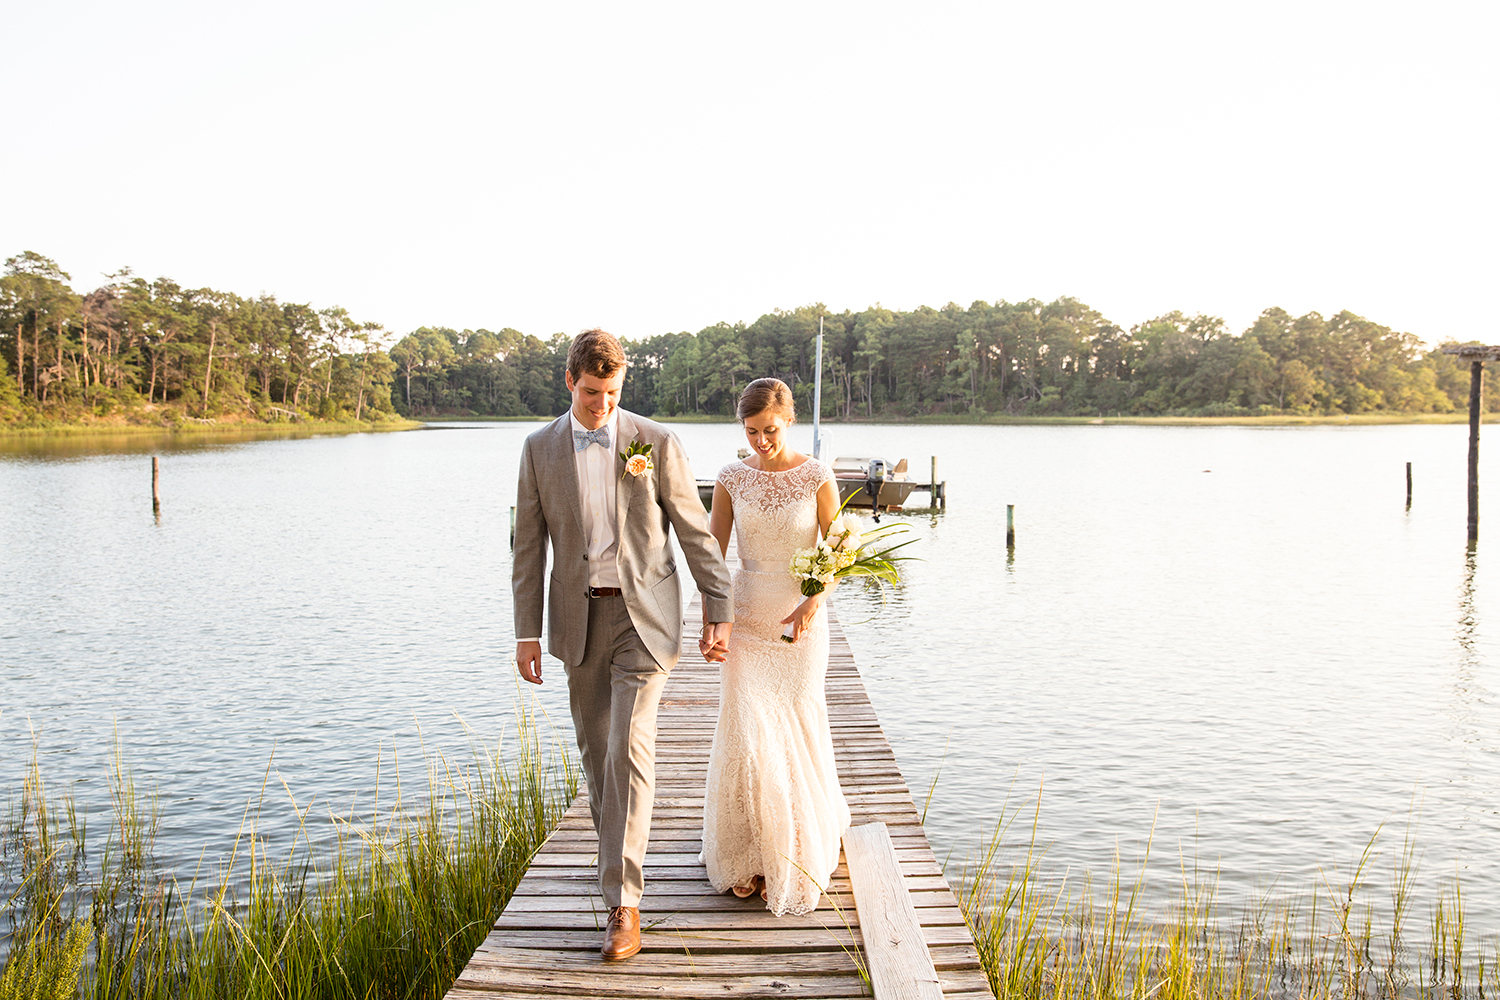 8 Ways to Beat the Heat at Your Summer Wedding - Image Property of www.j-dphoto.com